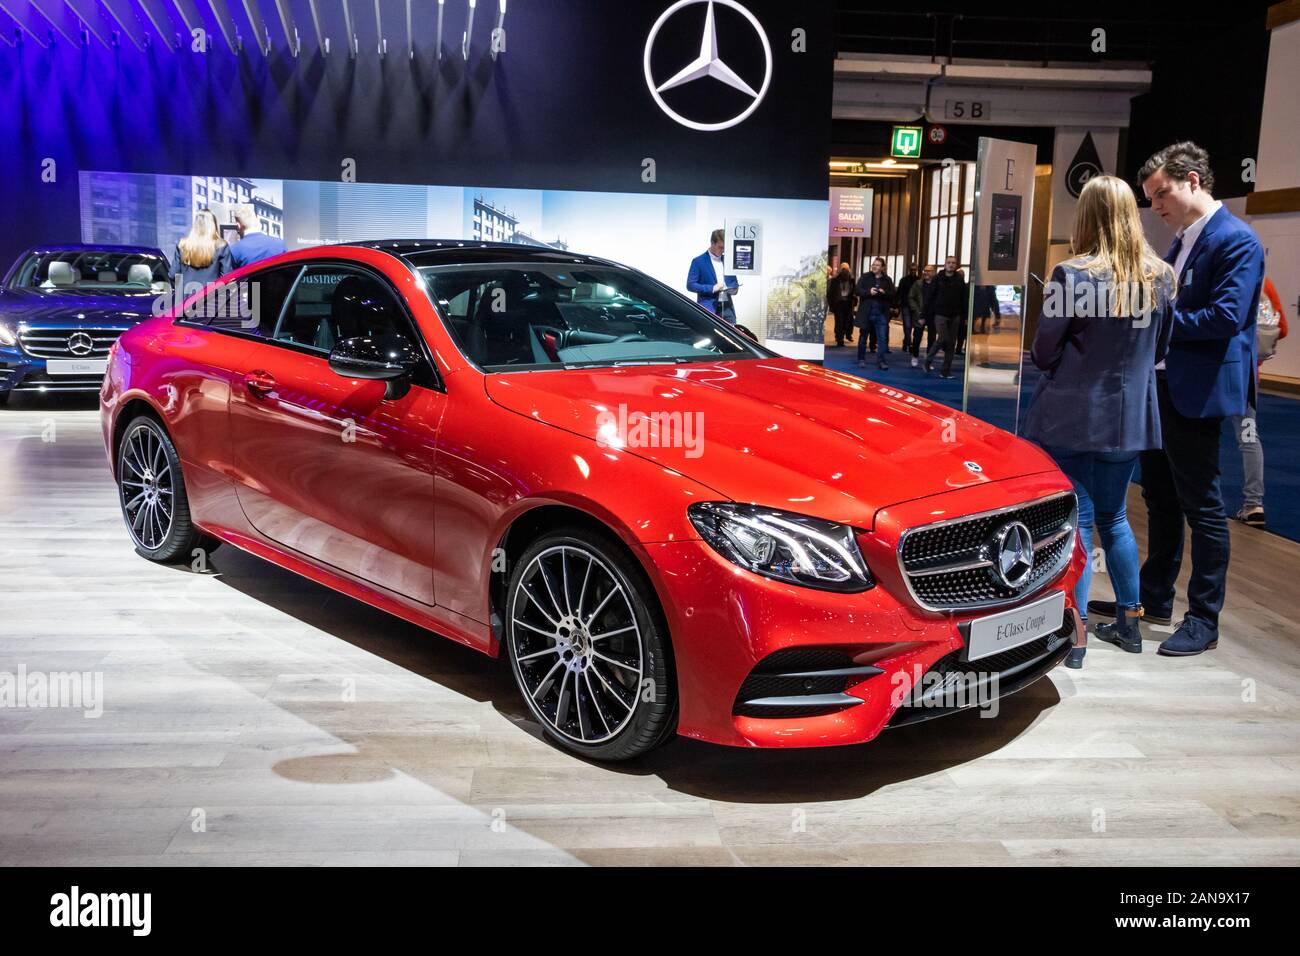 BRUSSELS - JAN 9, 2020: New Mercedes E-Class Coupe car model presented at the Brussels Autosalon 2020 Motor Show. Stock Photo